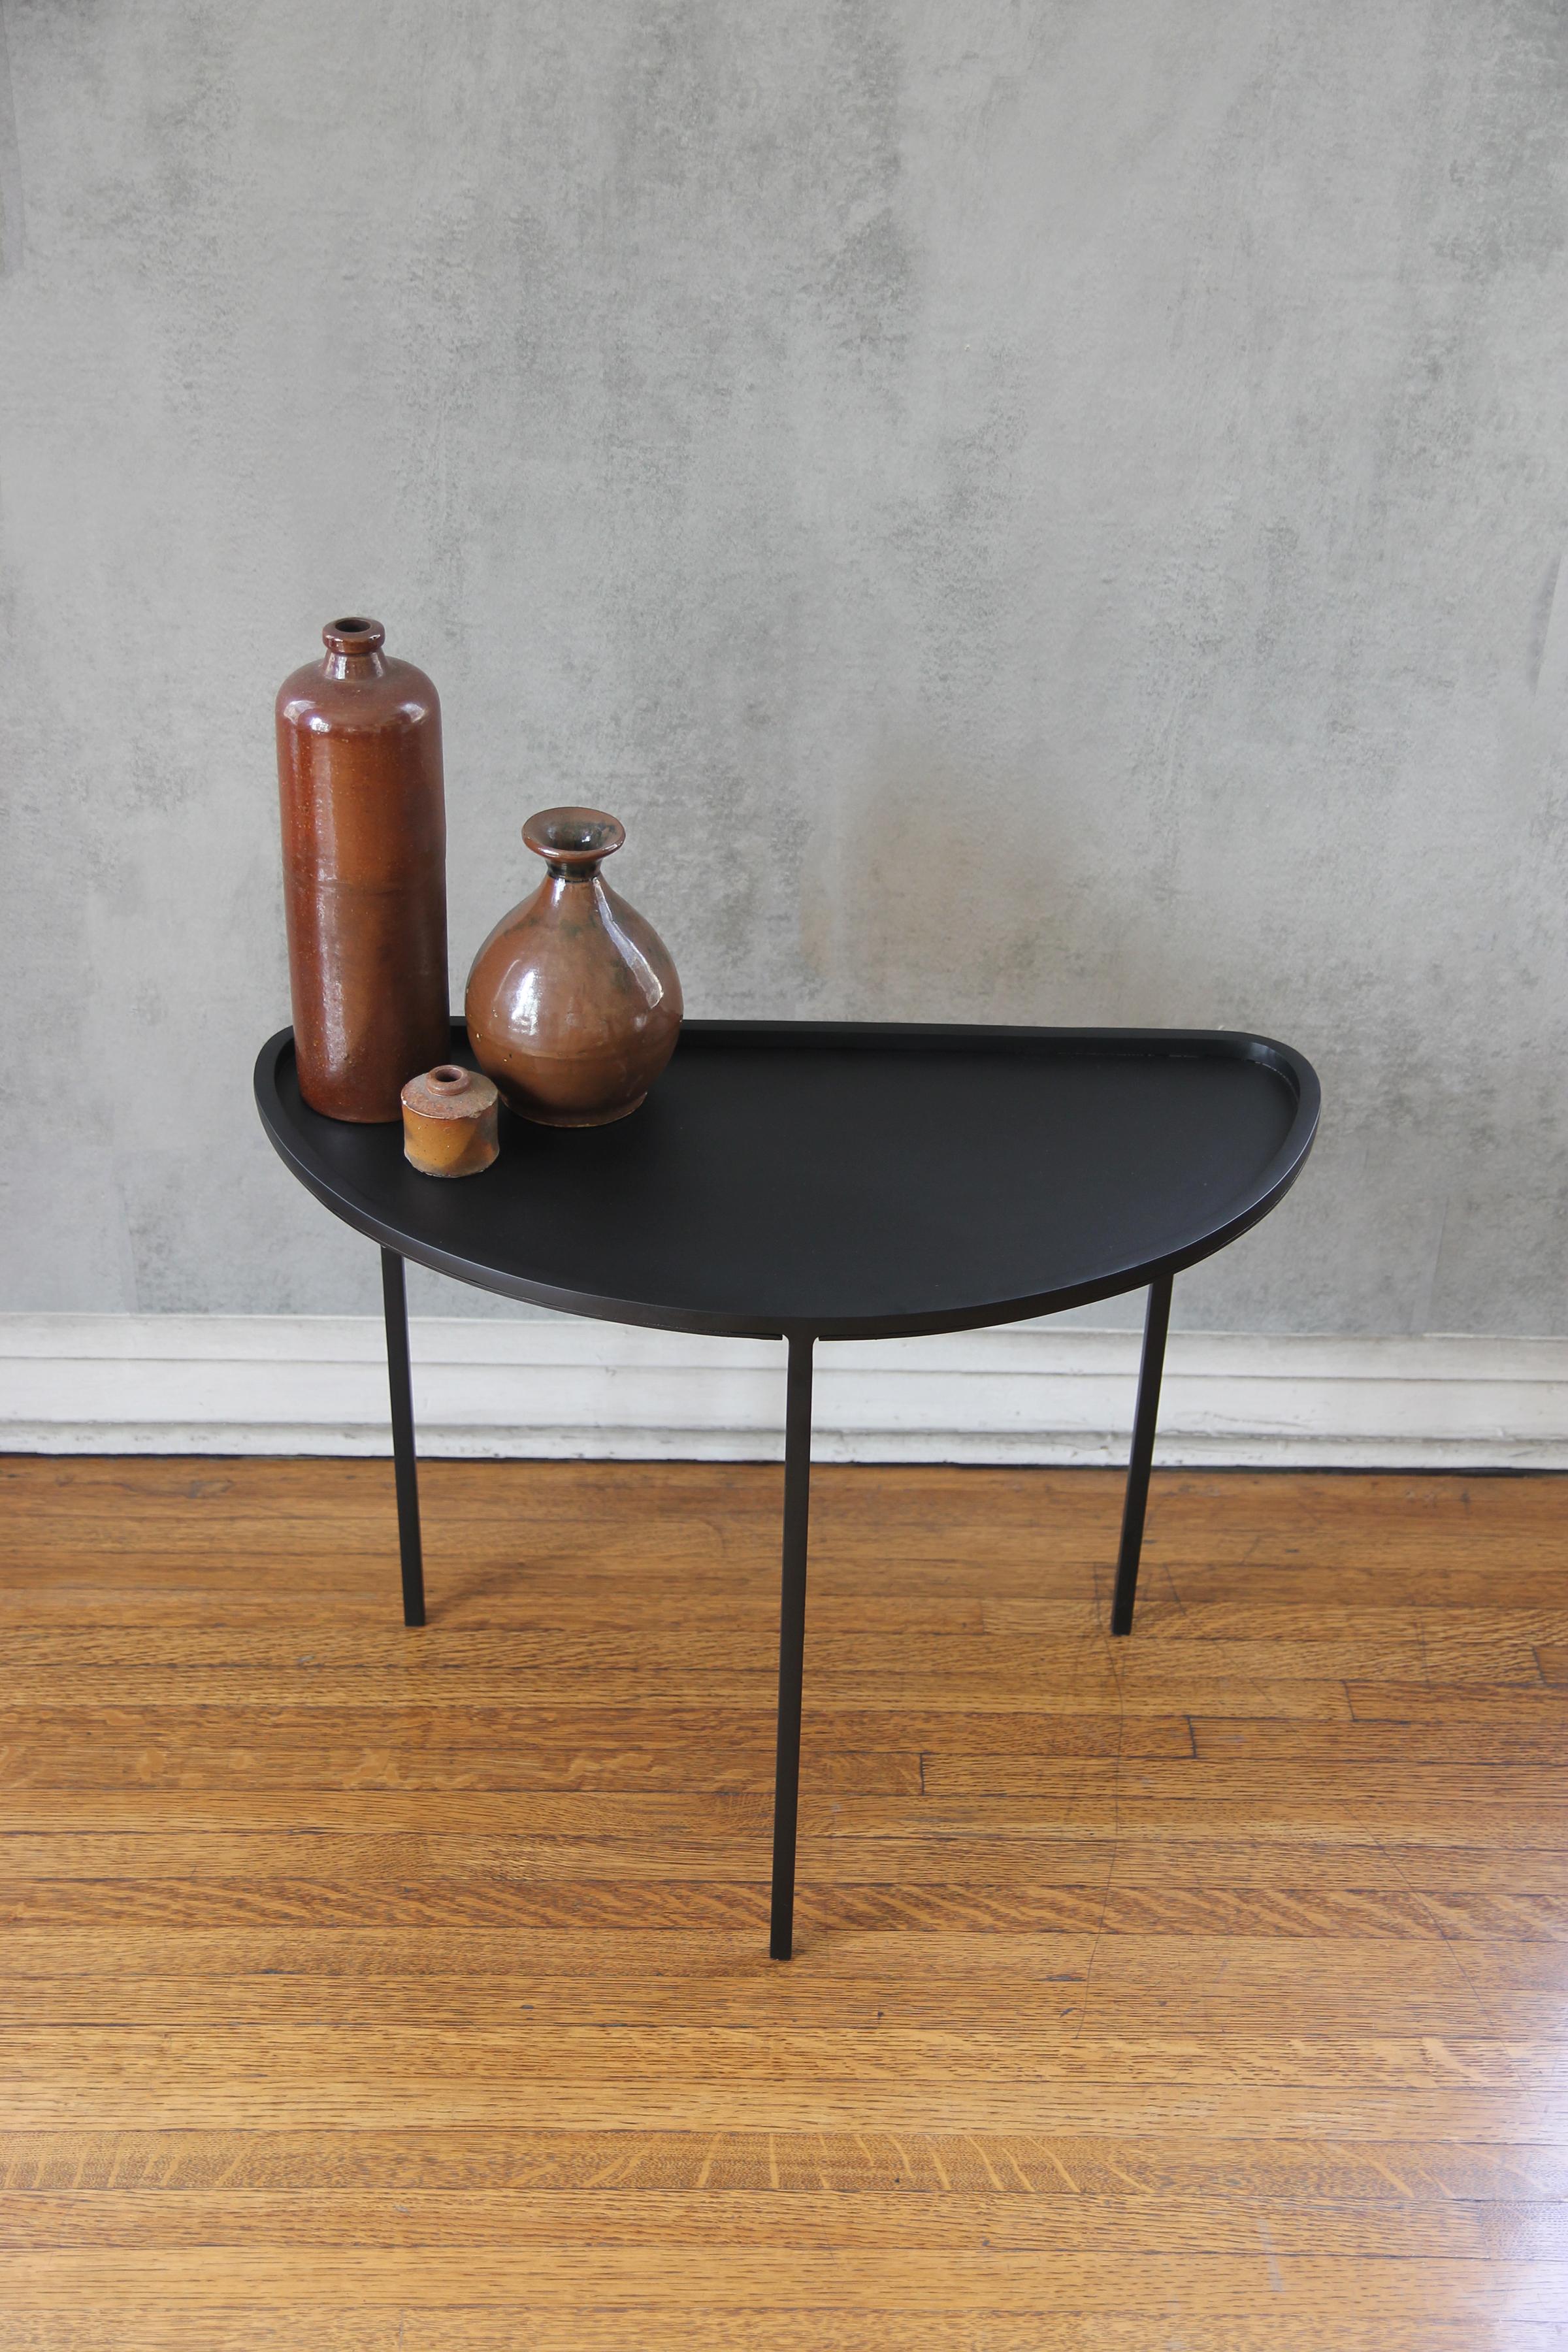  'Demi-Lune' Three Legs Blackened Steel Side Table by Understated Design For Sale 1